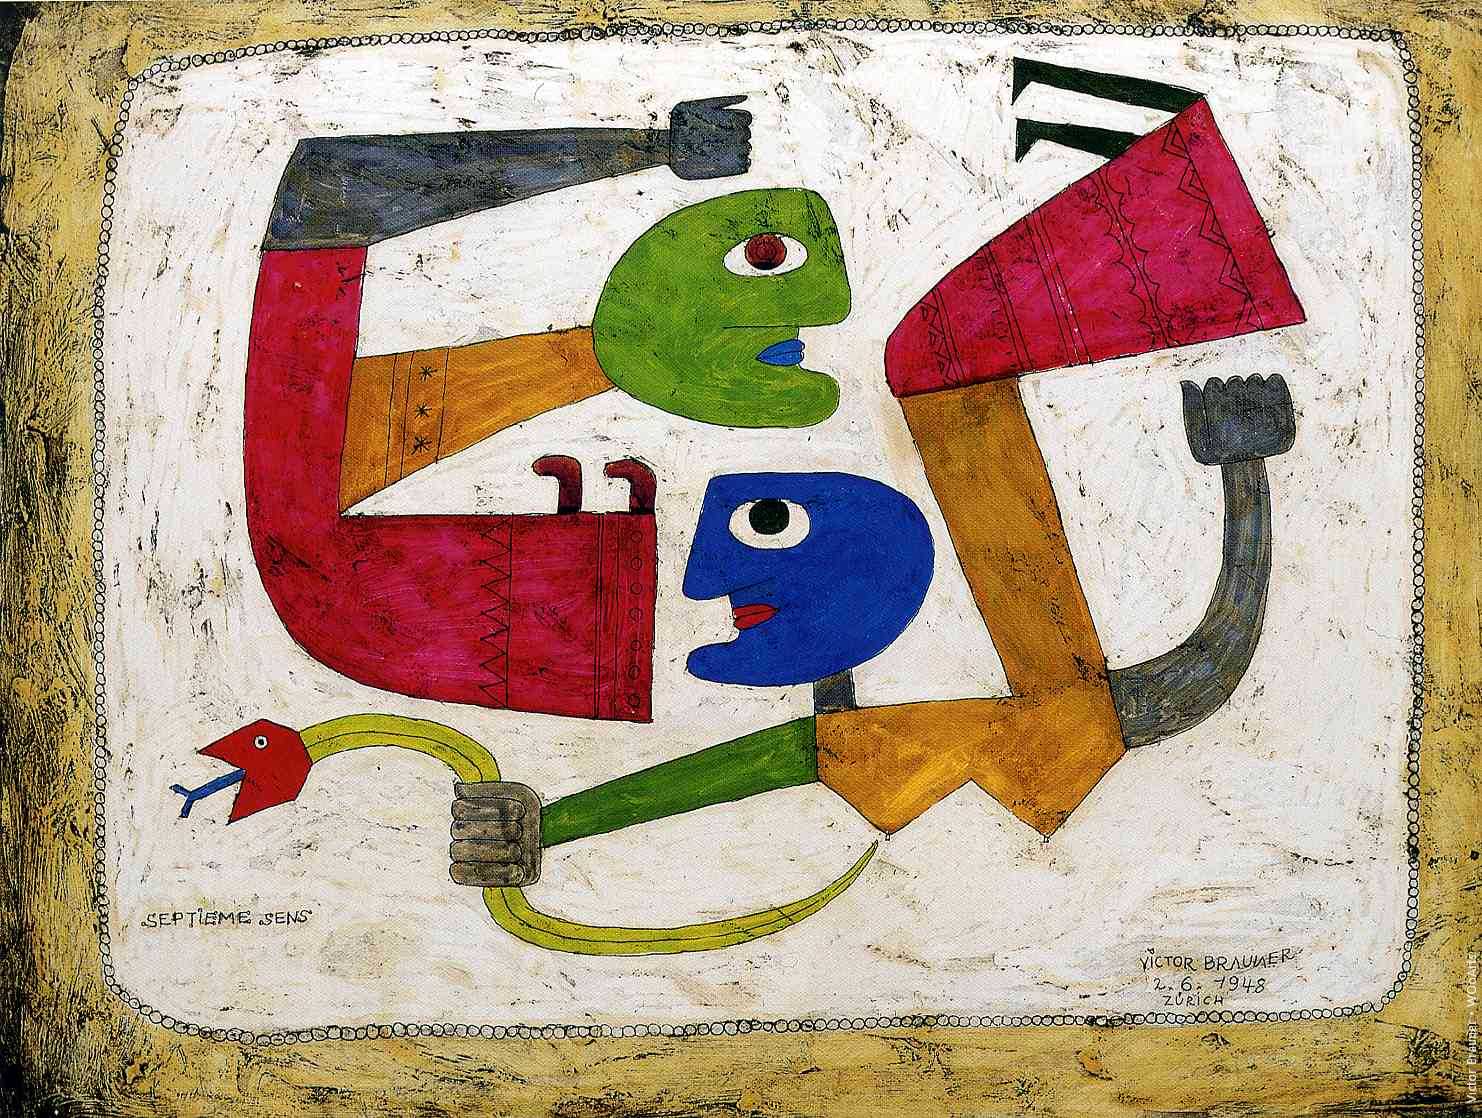 Painting by Victor Brauner